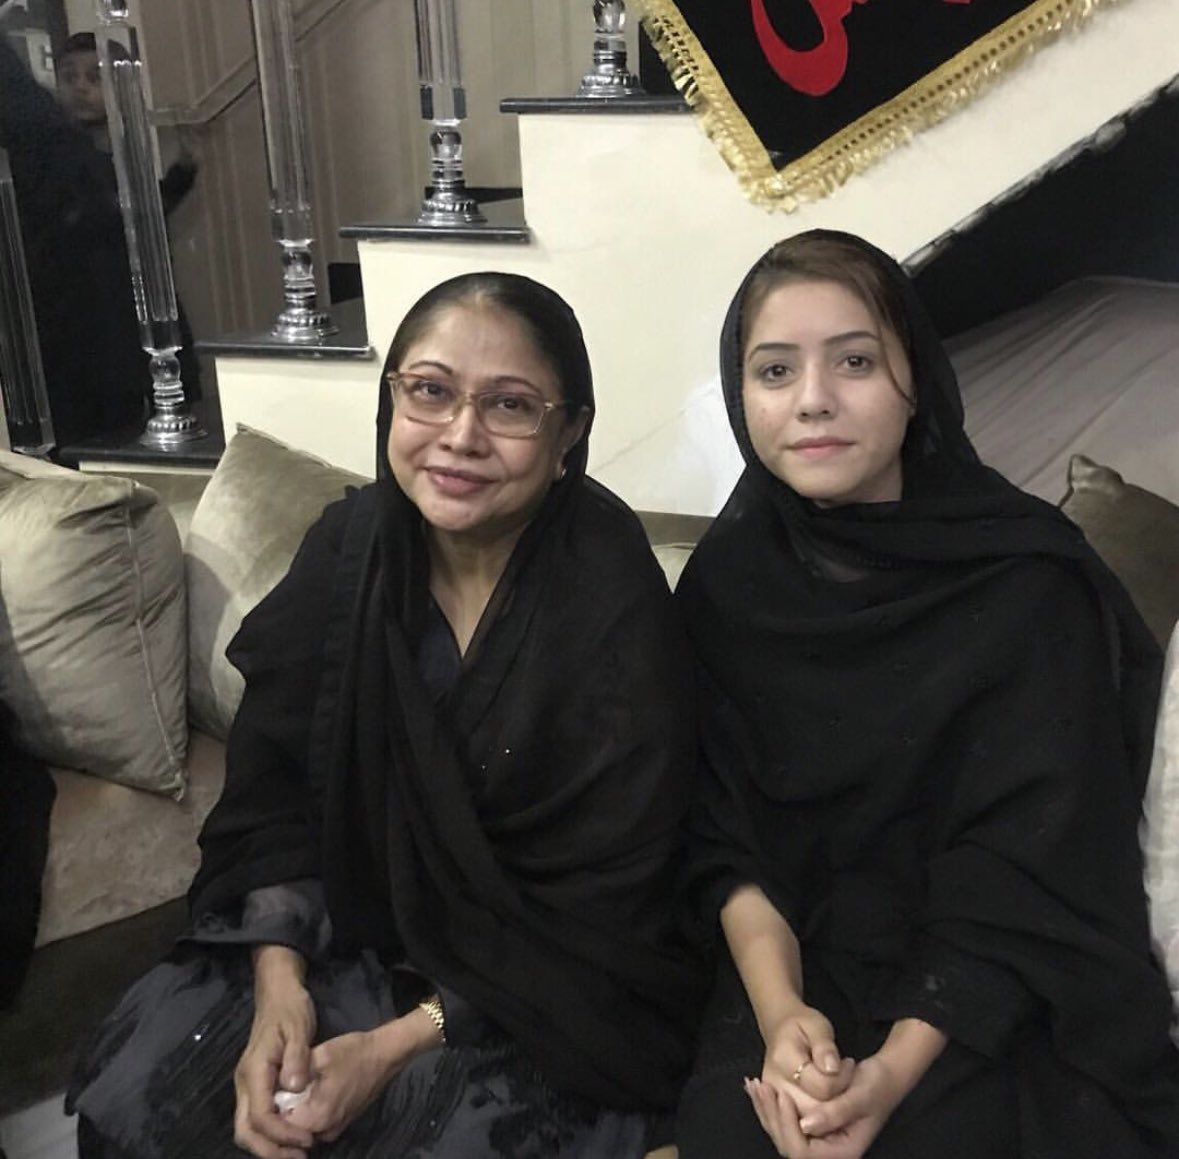 Happy Birthday to our fearless leader @FaryalTalpurPk, whose unwavering dedication to serving the people inspires us all. Your support and guidance has always given me motivation to struggle more. May your birthday be filled with joy and gratitude for the incredible leader you…